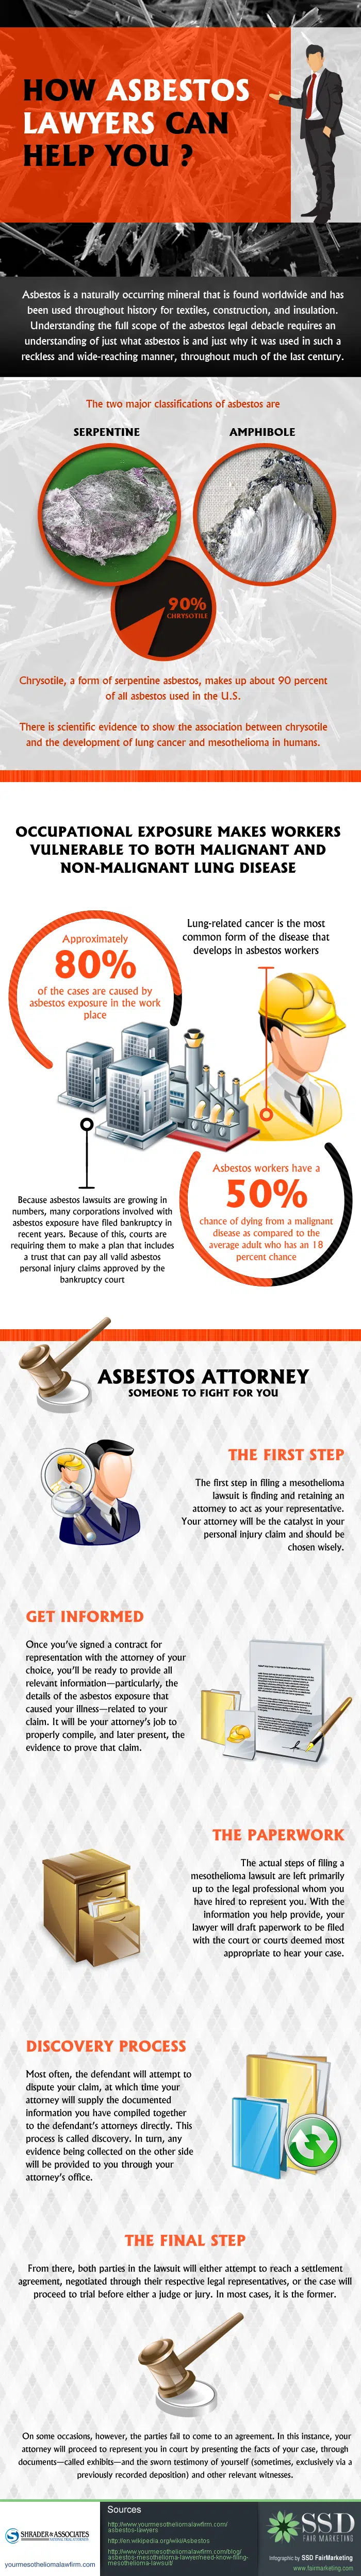 How Asbestos Lawyers Can Help You?